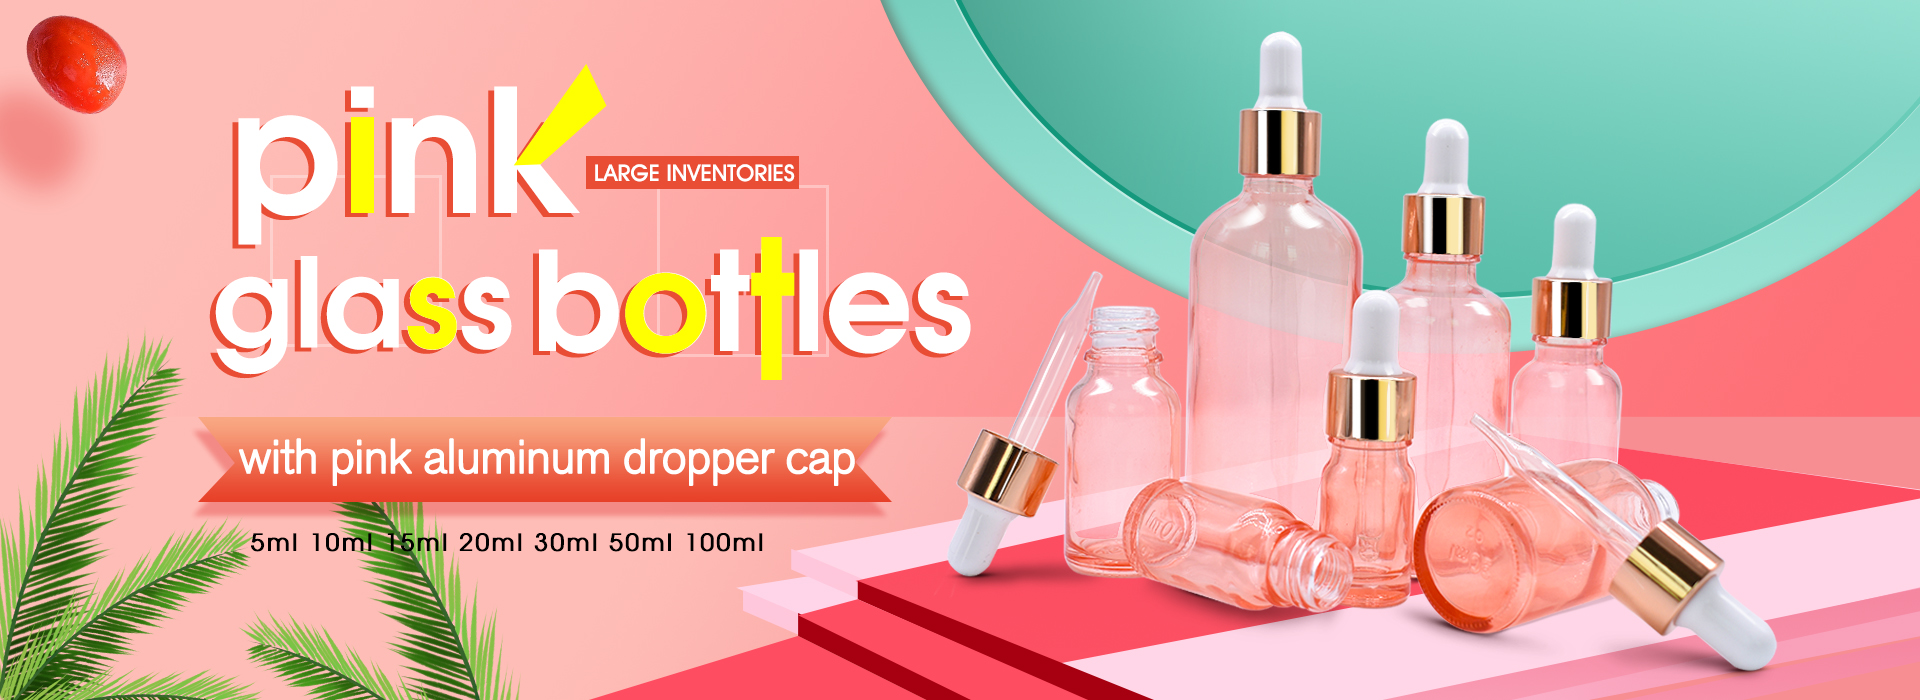 100ml glass bottle with spray